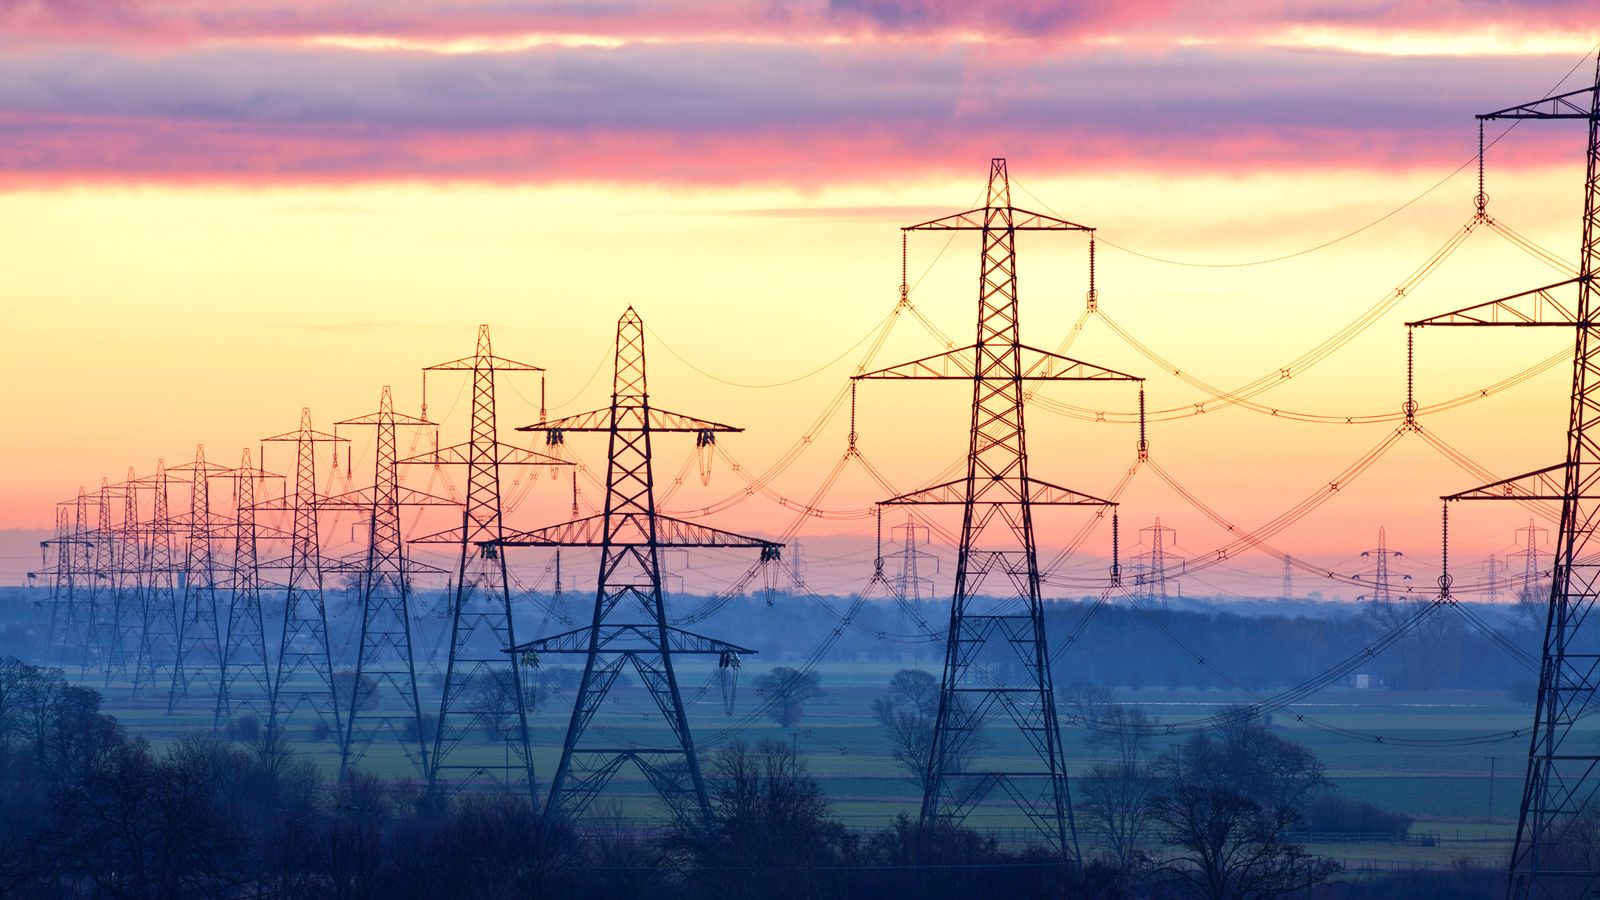 National Grid's 'transformational' pivot to electricity targets net